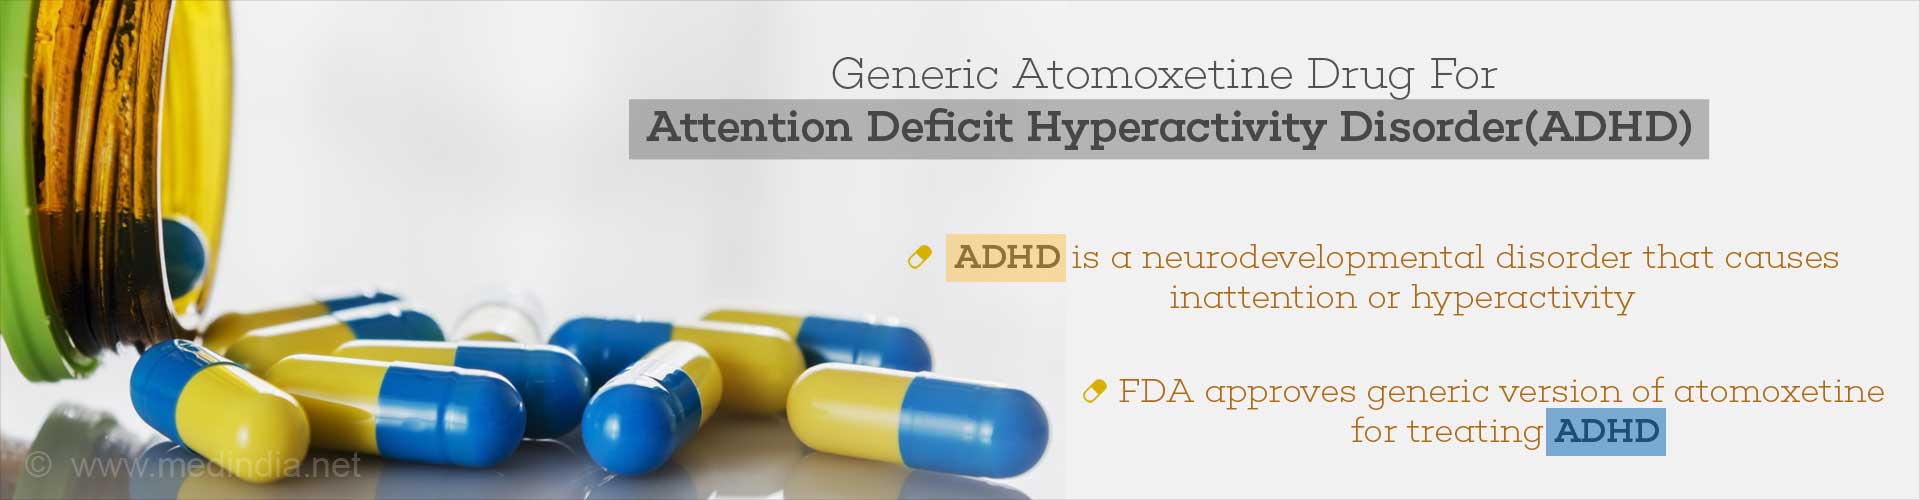 Generic atomoxetine drug for Attention Deficit Hyperactivity Disorder (AHDH)
- AHDH is a neuro-development disorder that causes inattention or hyperactivity
- FDA approves generic version of atomoxetine for treating AHDH